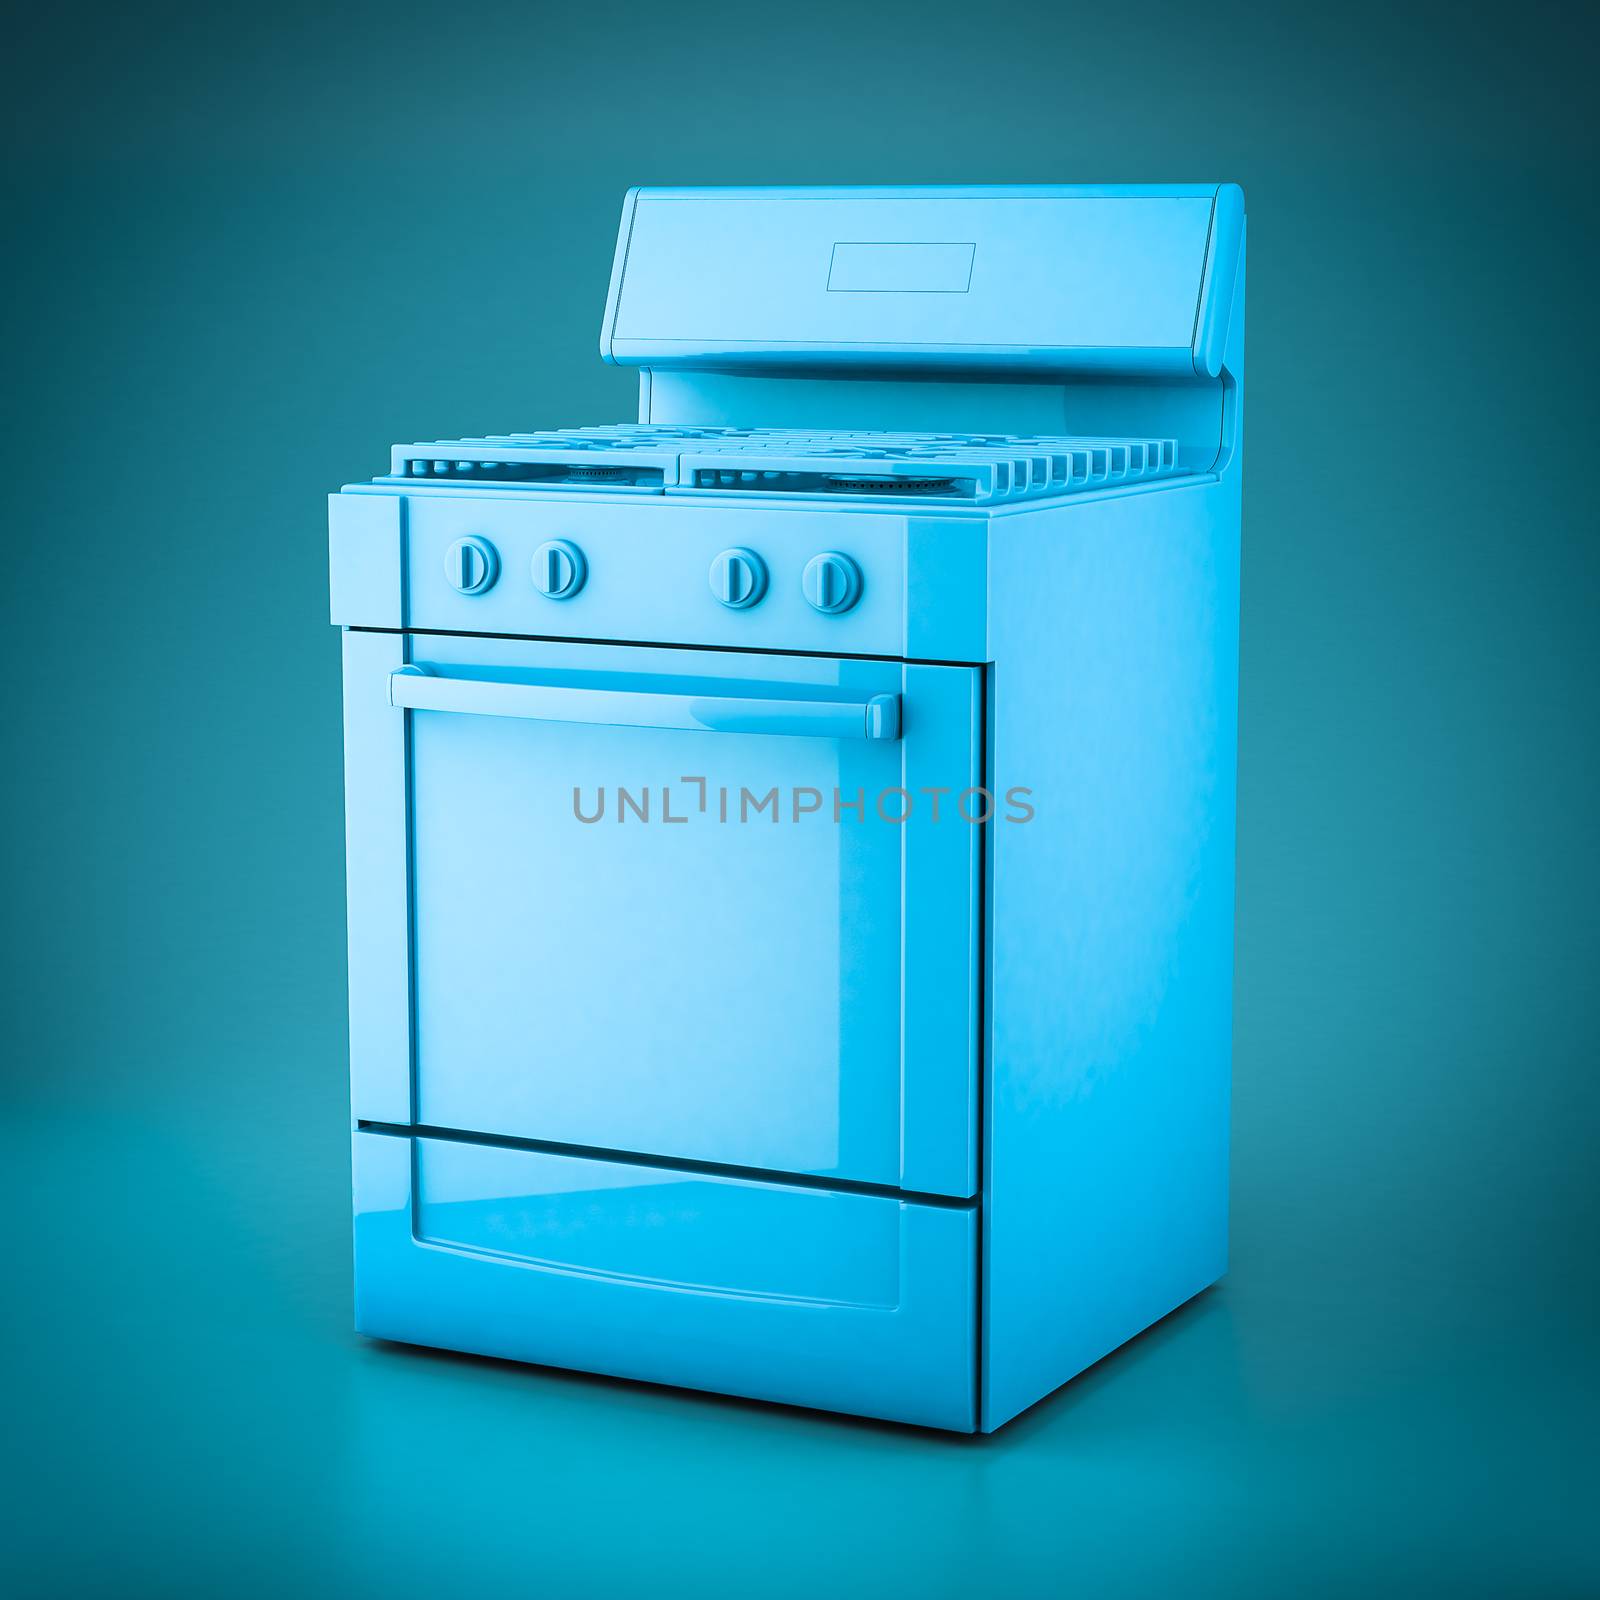 3D rendering household appliances by mrgarry